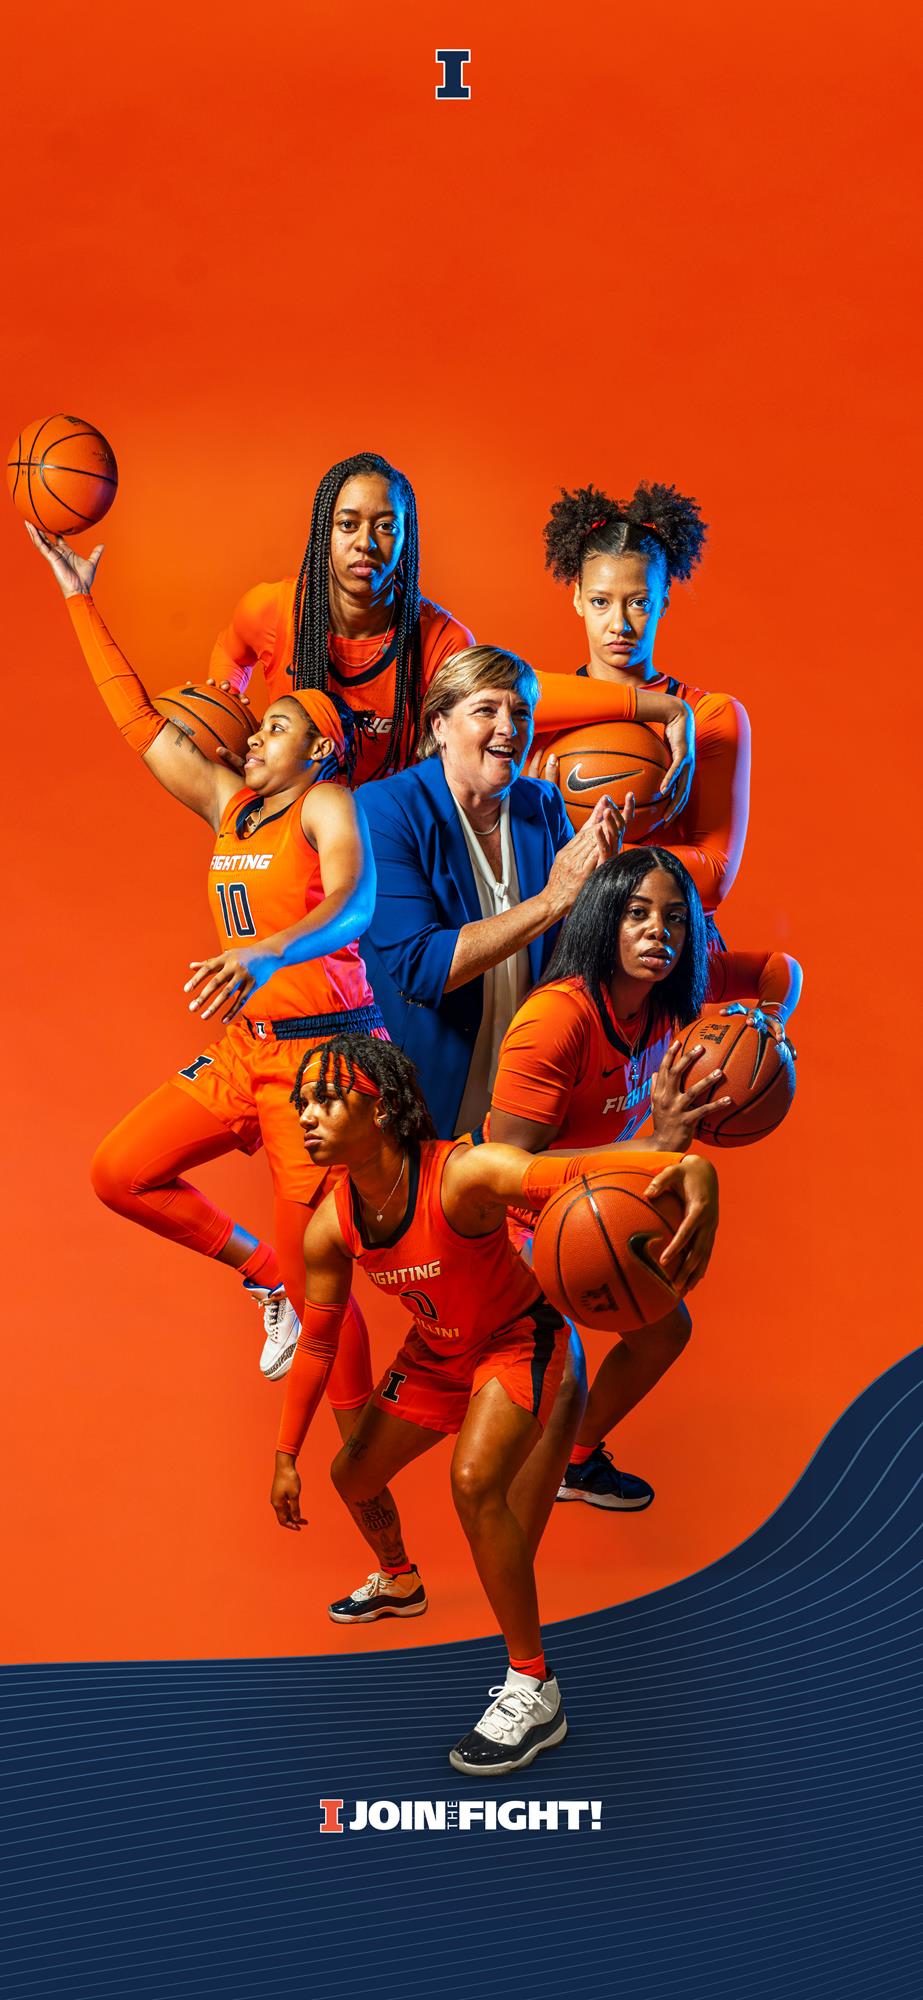 Poster & Wallpaper Downloads of Illinois Athletics